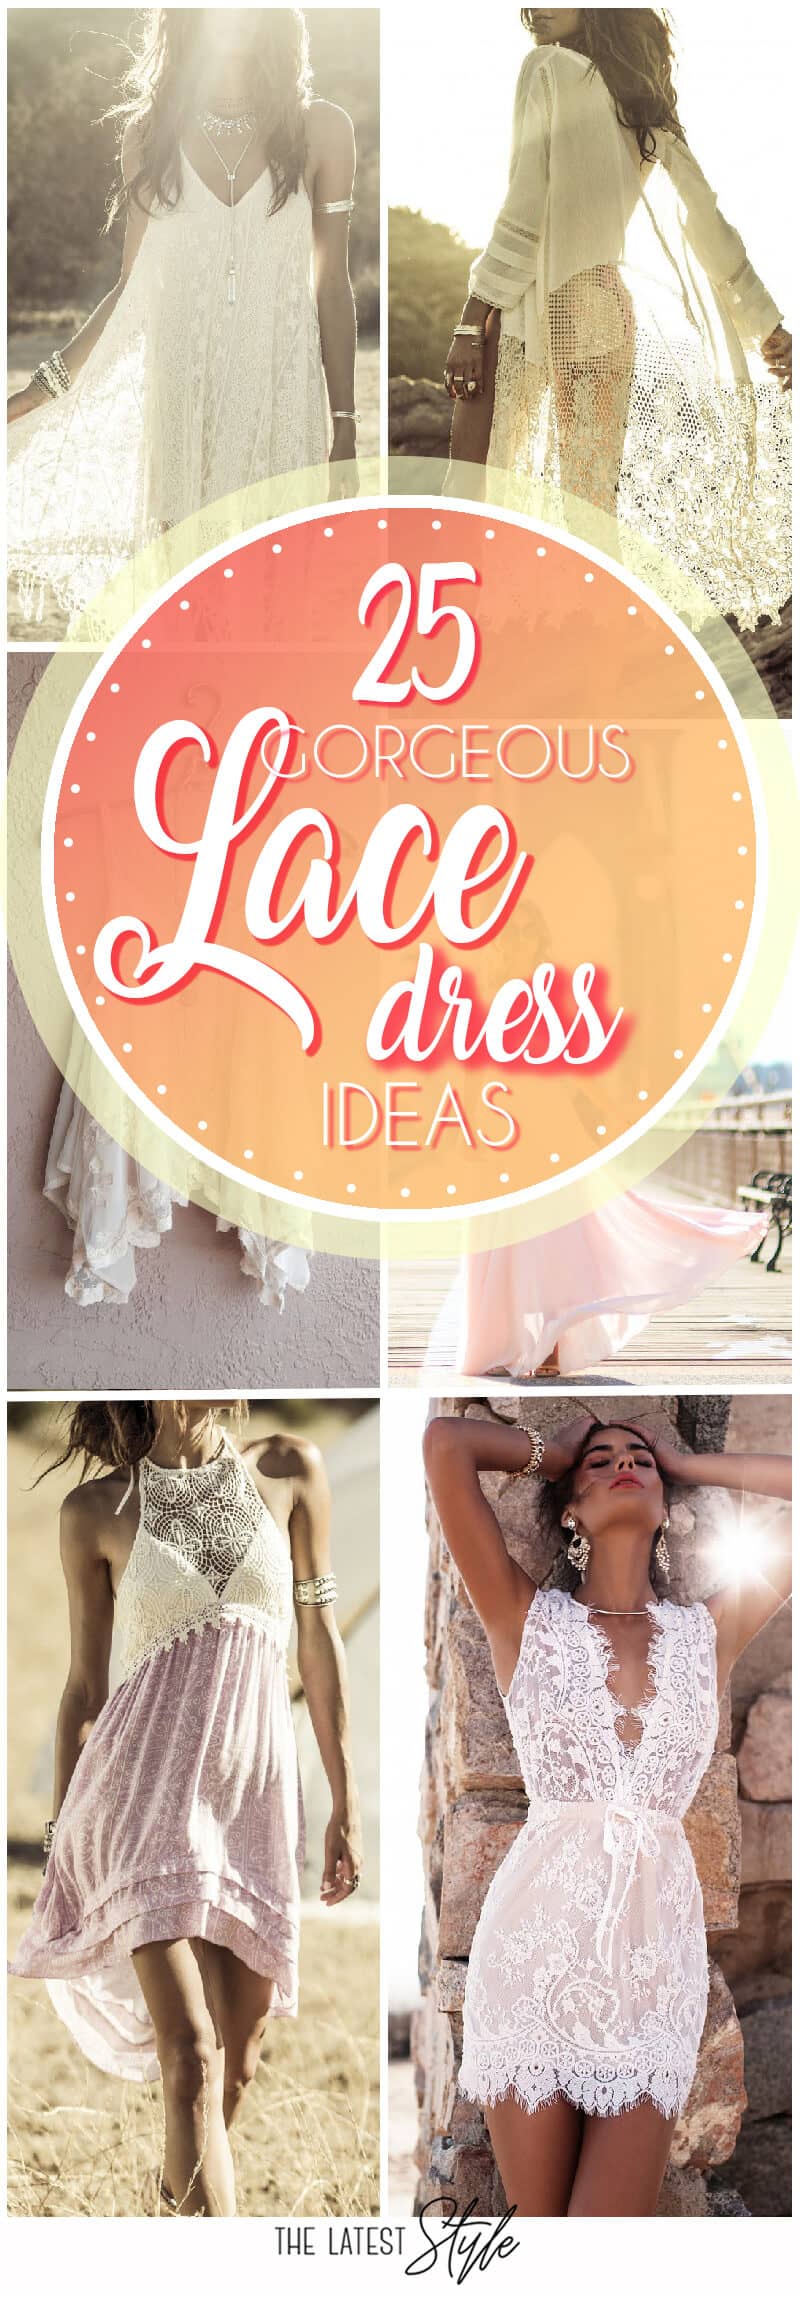 25 Gorgeous Dresses With Lace